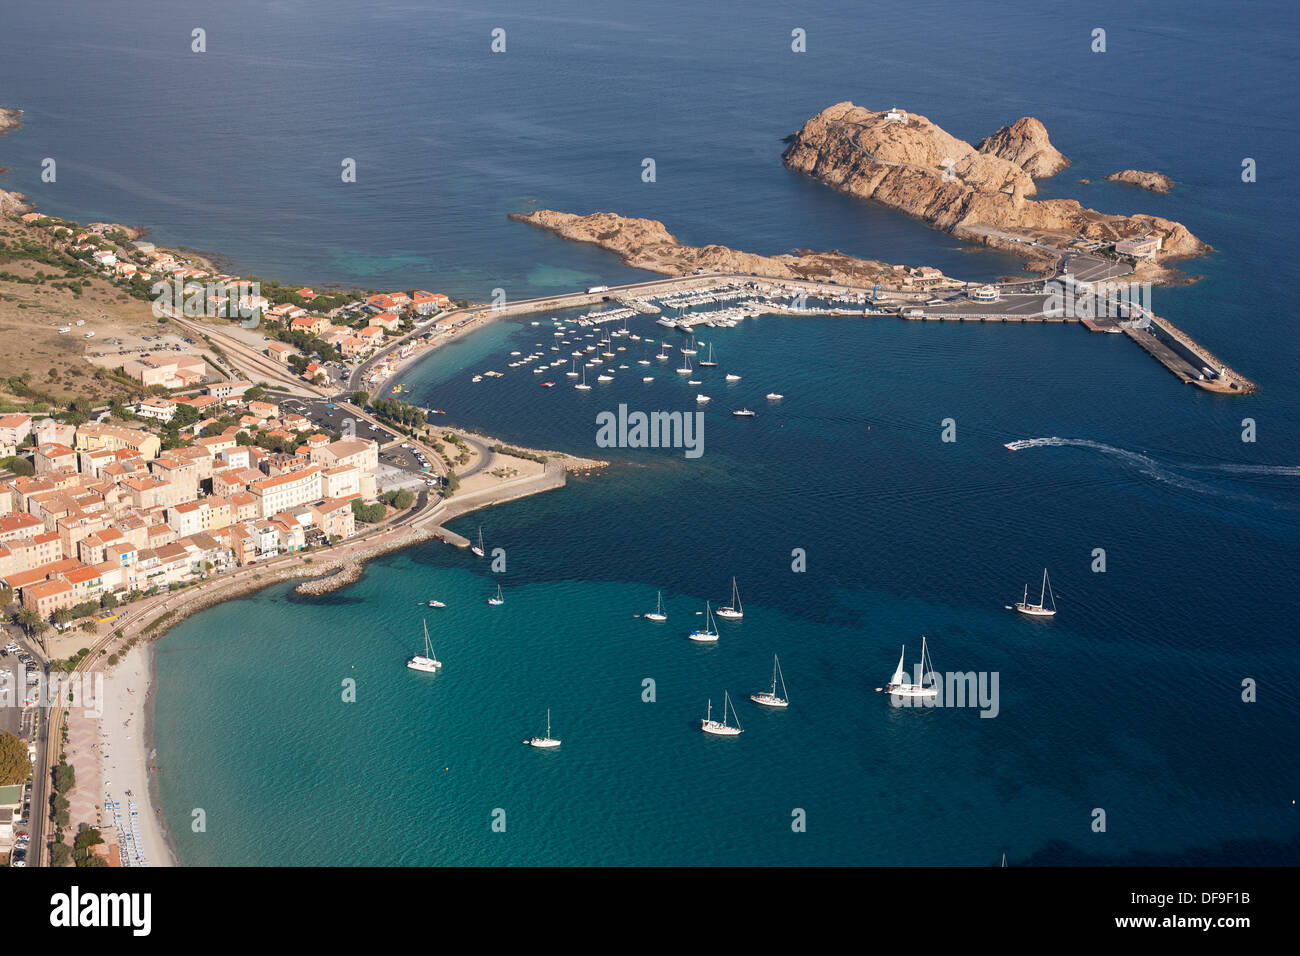 AERIAL VIEW. City of Île Rousse with the old town and the pier linking it to a rocky island used as a ferry terminal. Corsica, France. Stock Photo